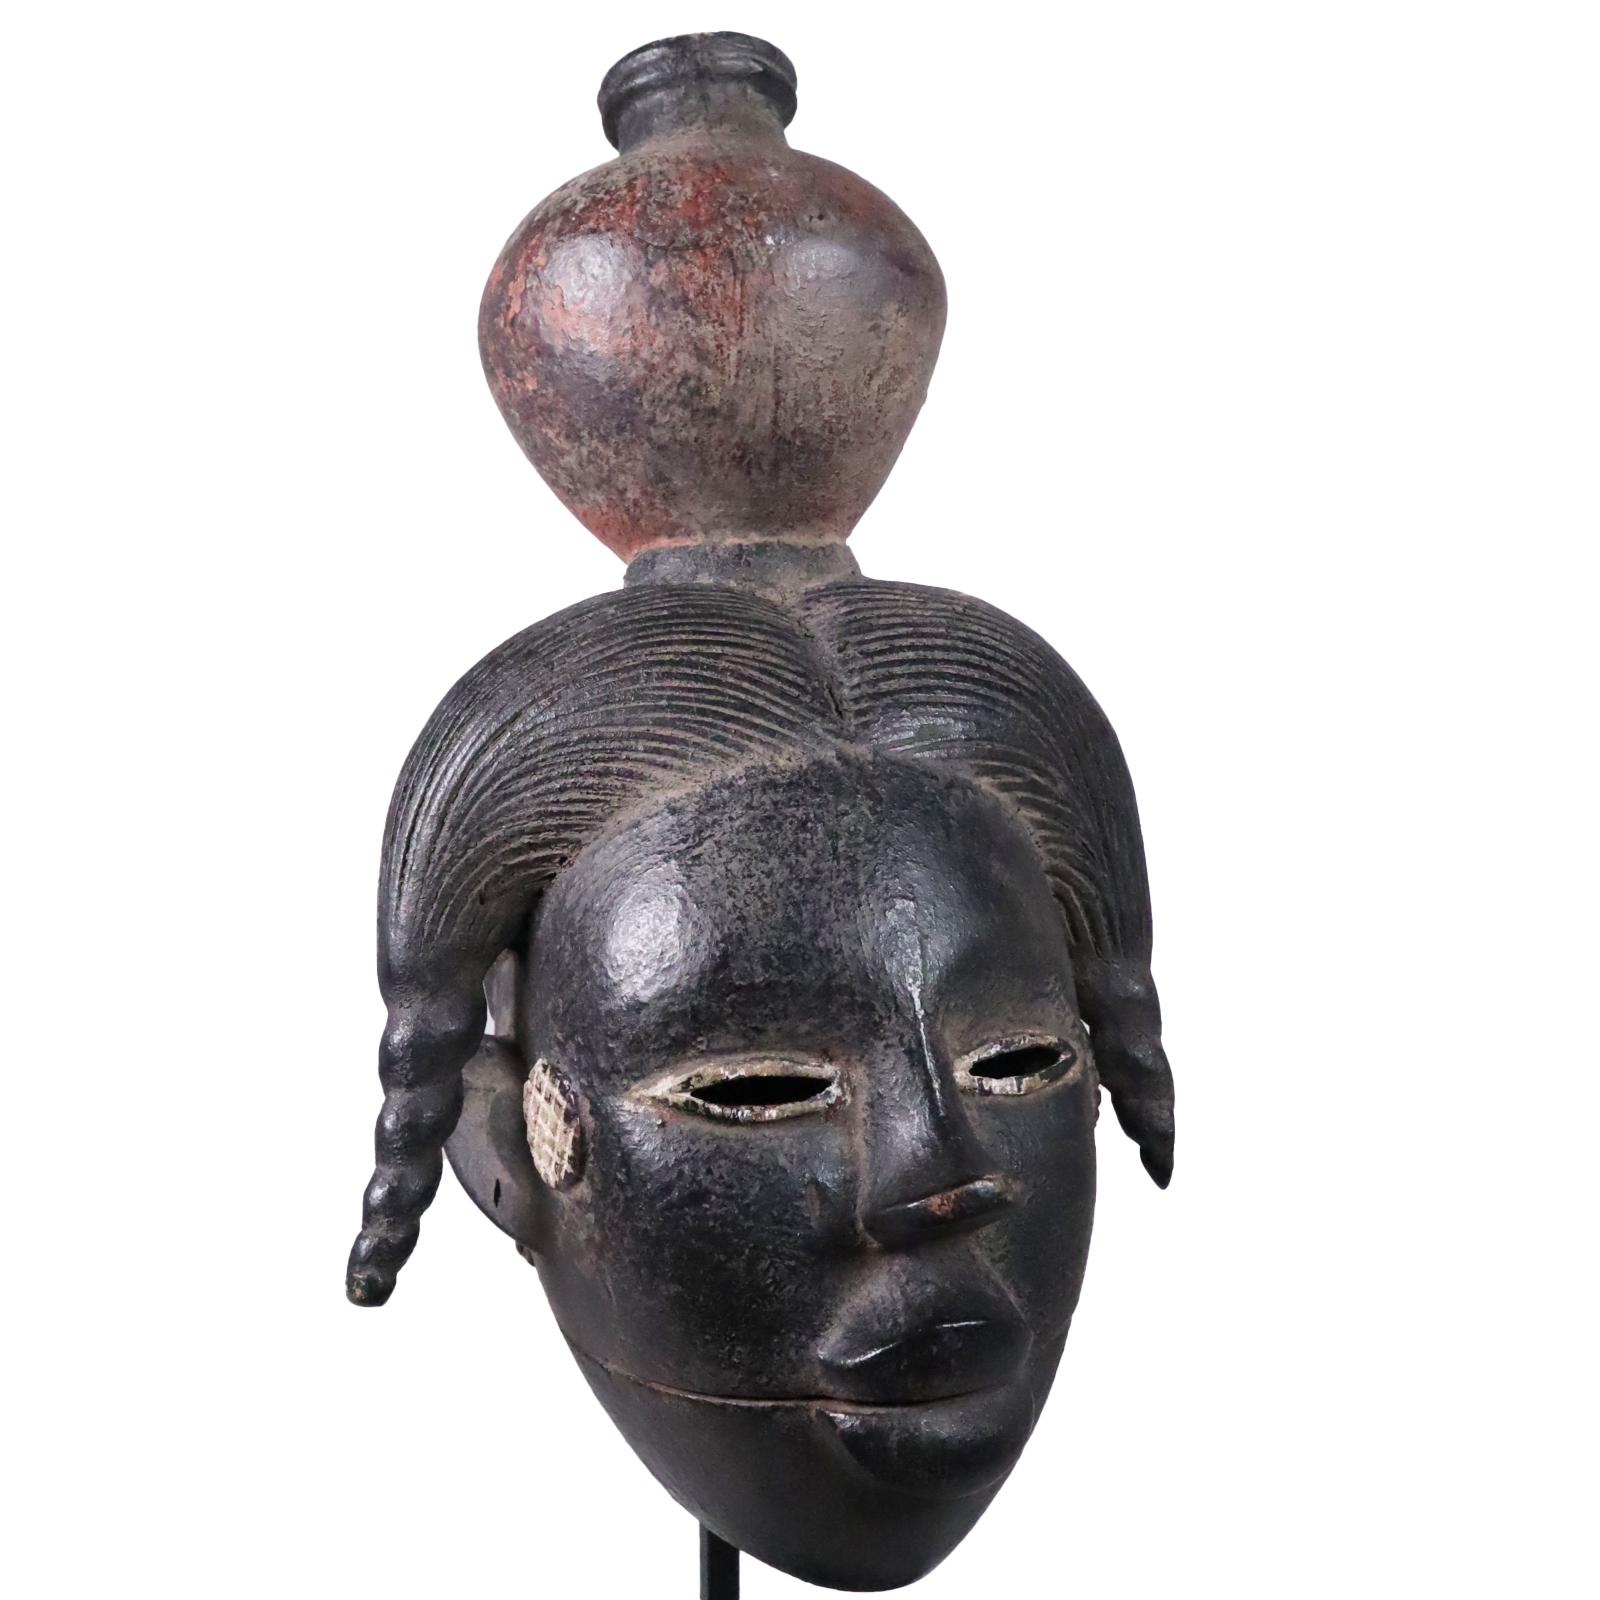 Mask with hinged jaw, Ogoni people, Southern Nigeria. Wood with black, white, and red-brown pigments. The lower jaw has inset slivers of wood for teeth (see photos). Created in the middle to late part of the 20th century.
Measures: 12 x 6 1/2 5